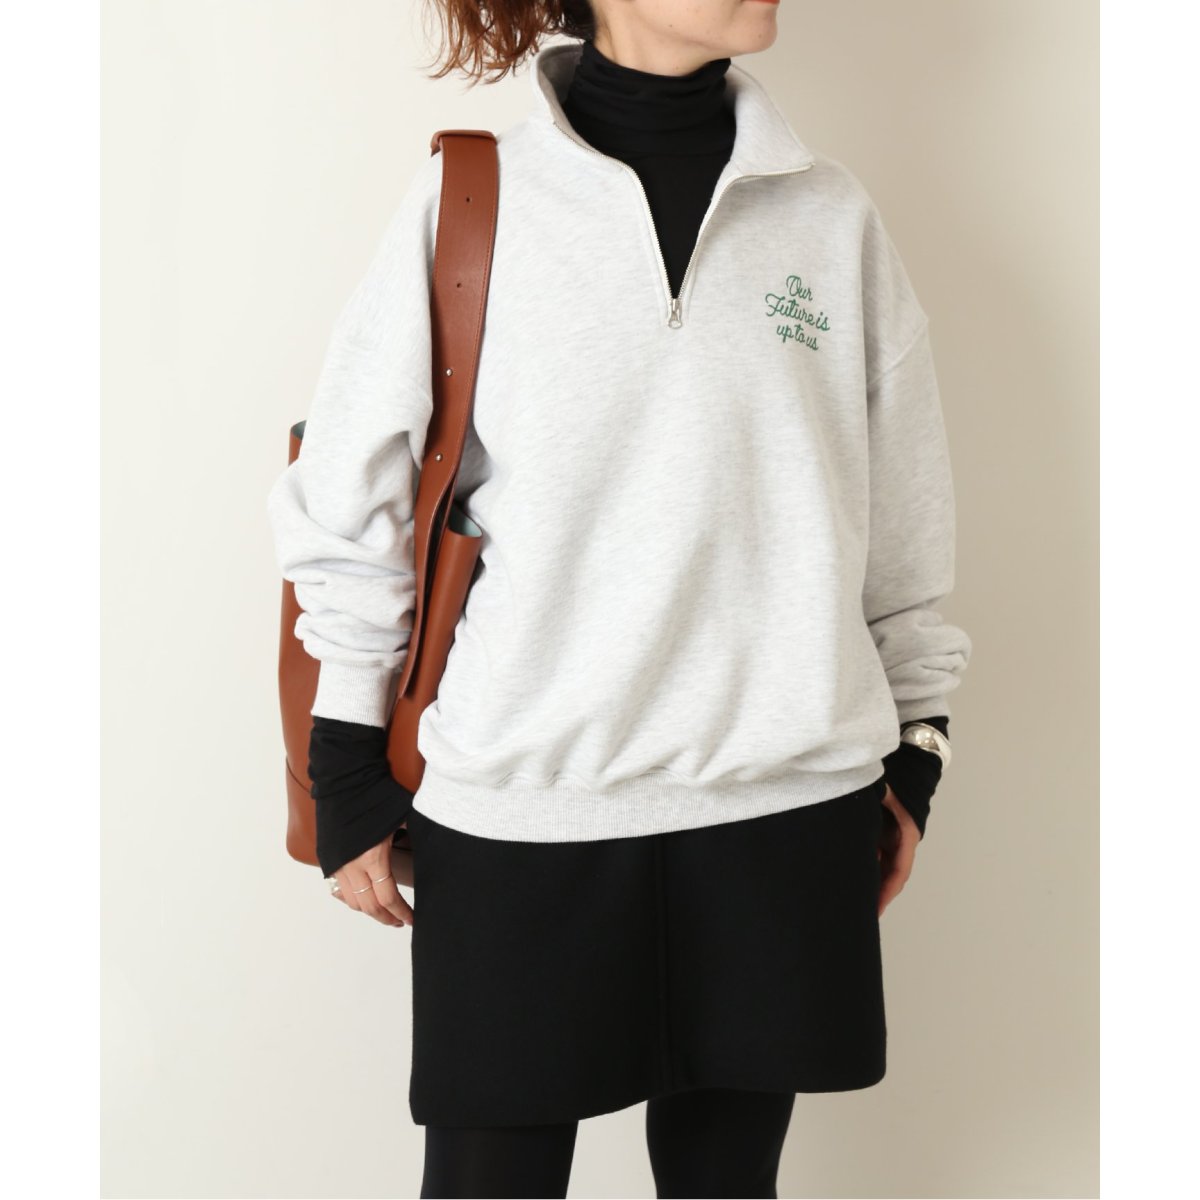 WAVE UNION 別注HIGH NECK ZIP PULL OVER